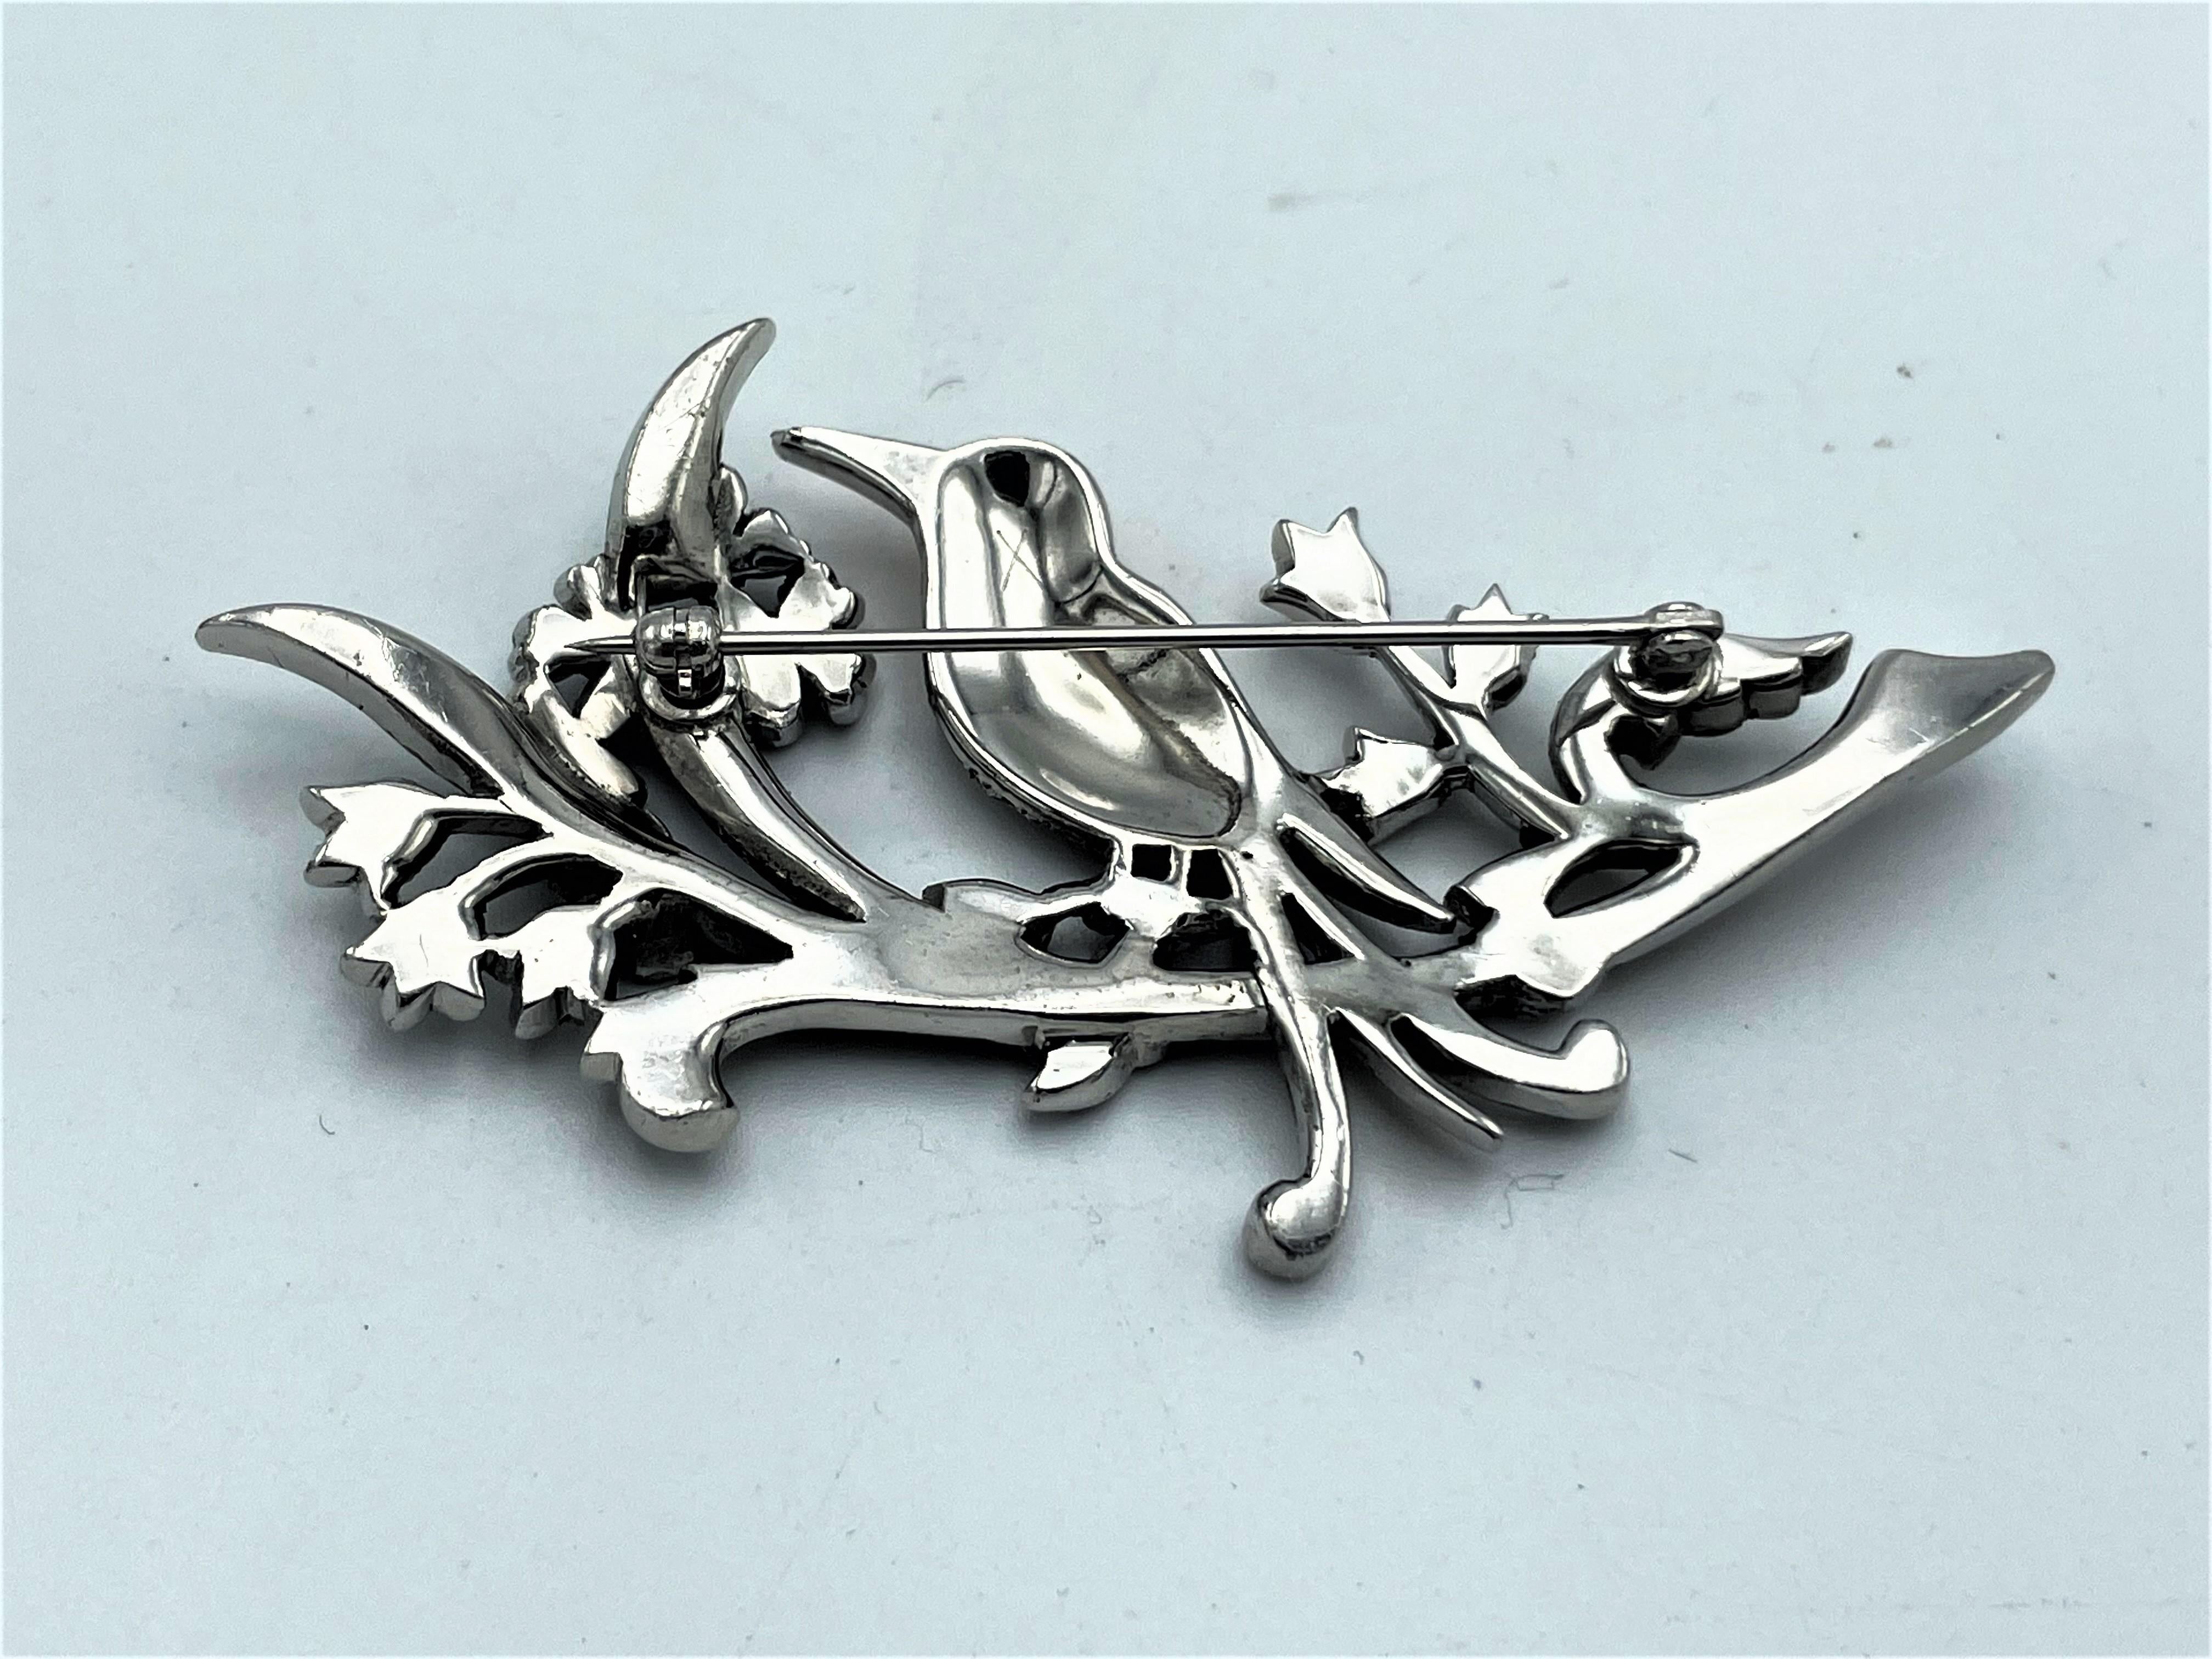 DUJAY unsigned metallic enamel brooch, bird on the branches, 1940s USA  4